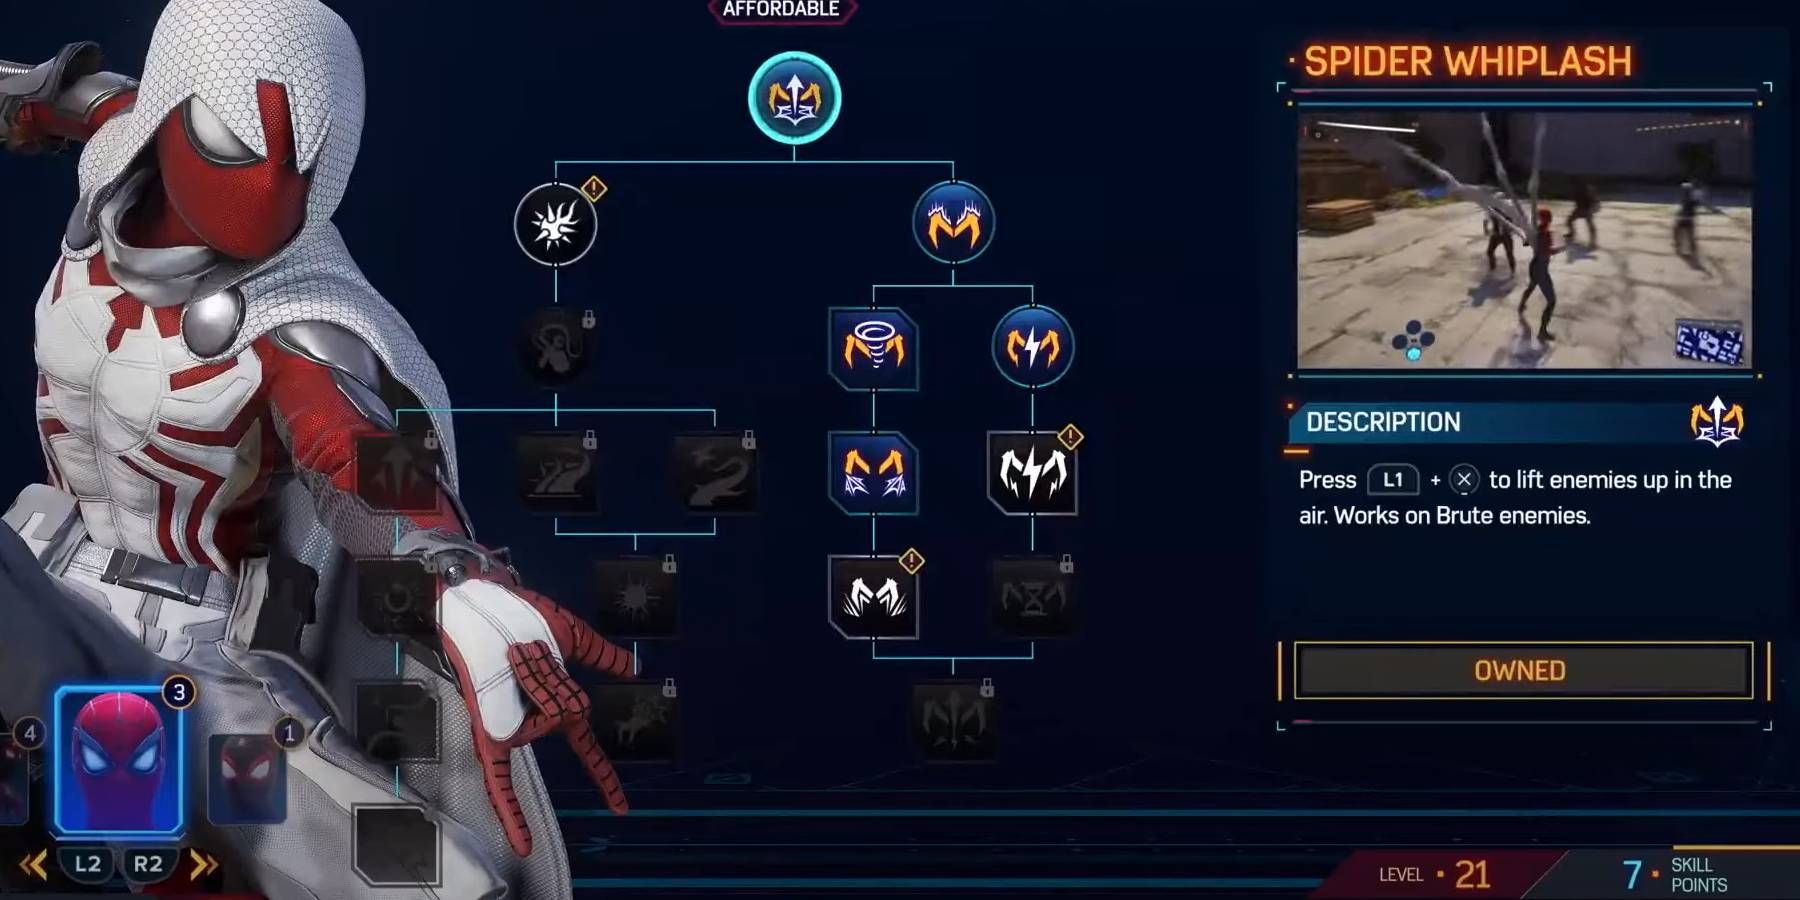 How To Earn Skill Points Fast in Marvel's Spider-Man 2